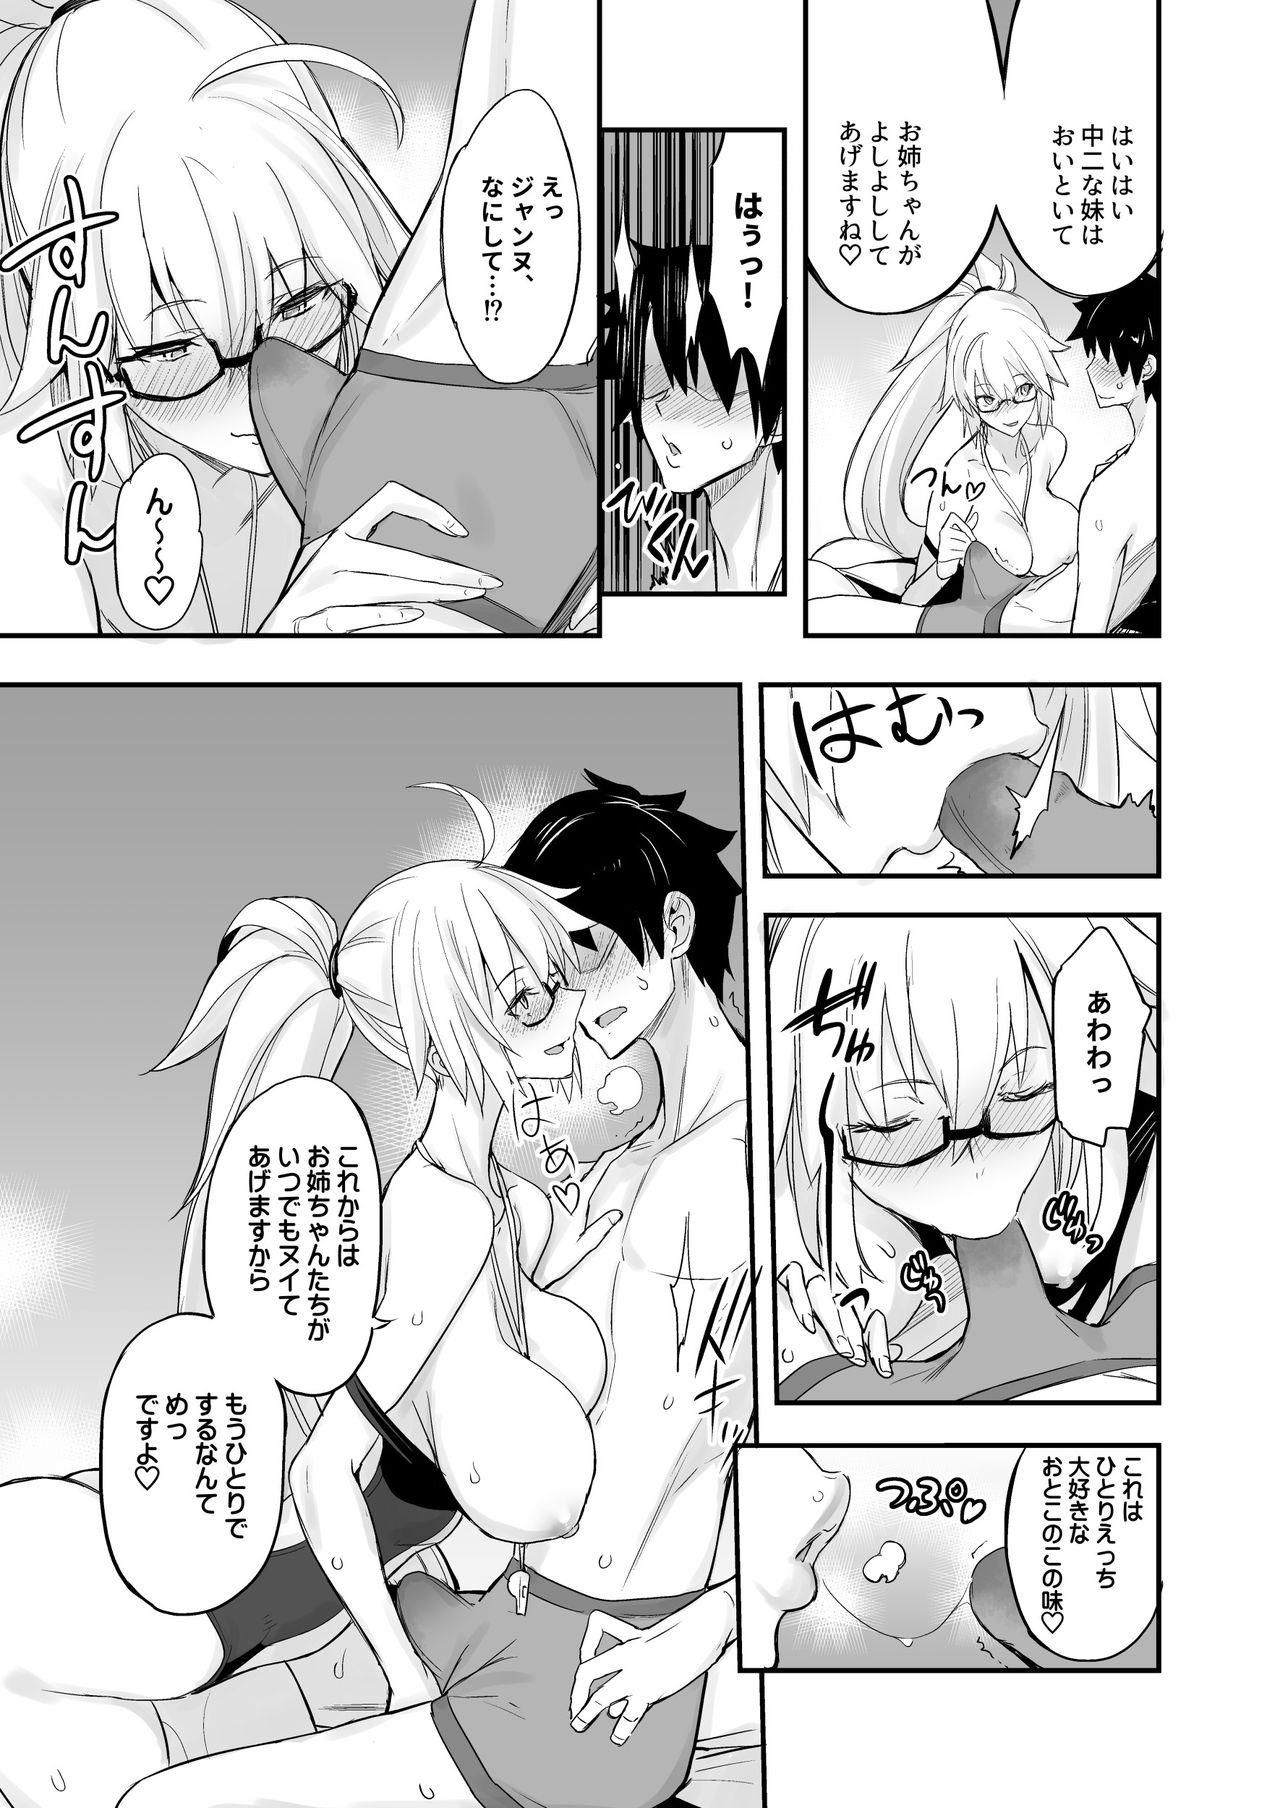 Sucking W Jeanne vs Master - Fate grand order Bed - Page 8